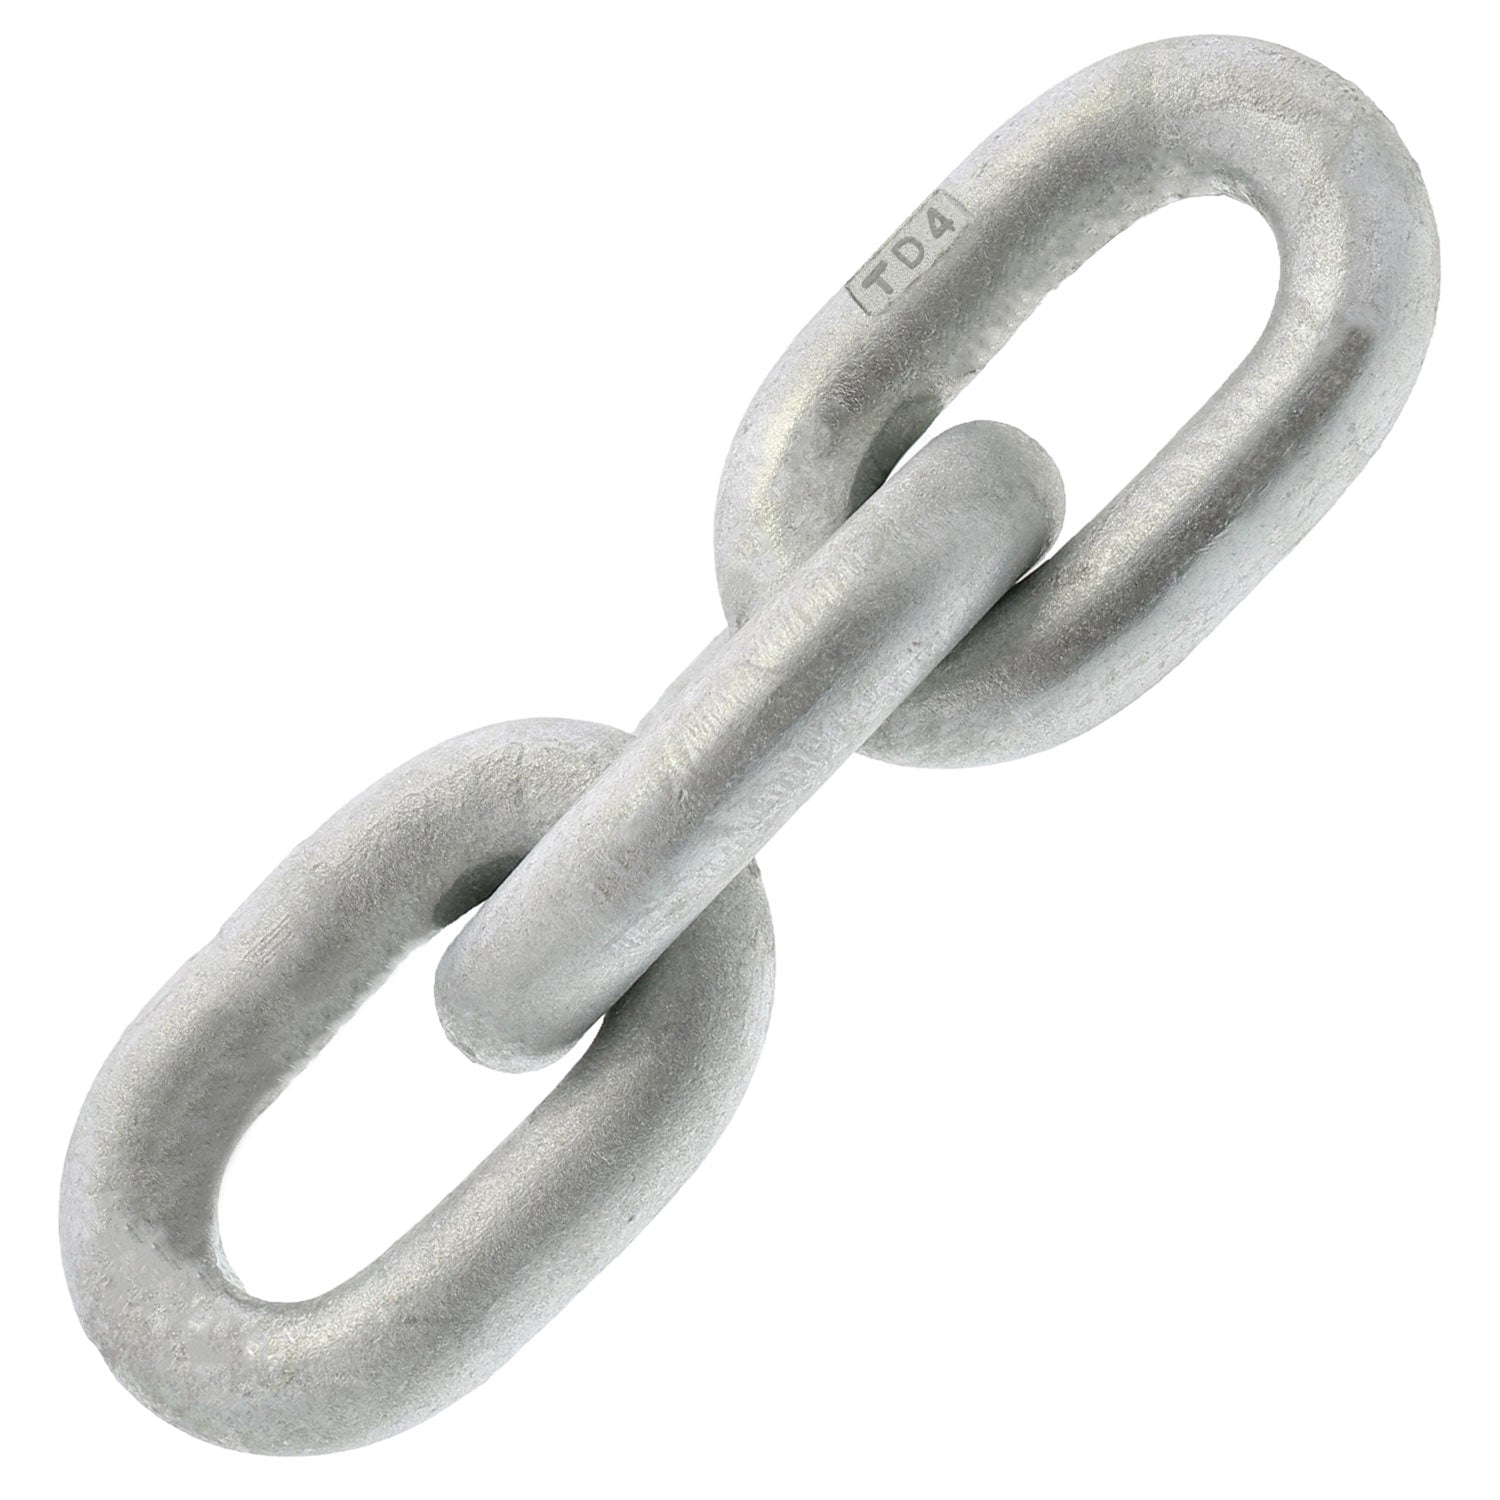 10mm Trident Marine DIN766, Hot Dipped Galvanized Chain (Sold Per Foot)